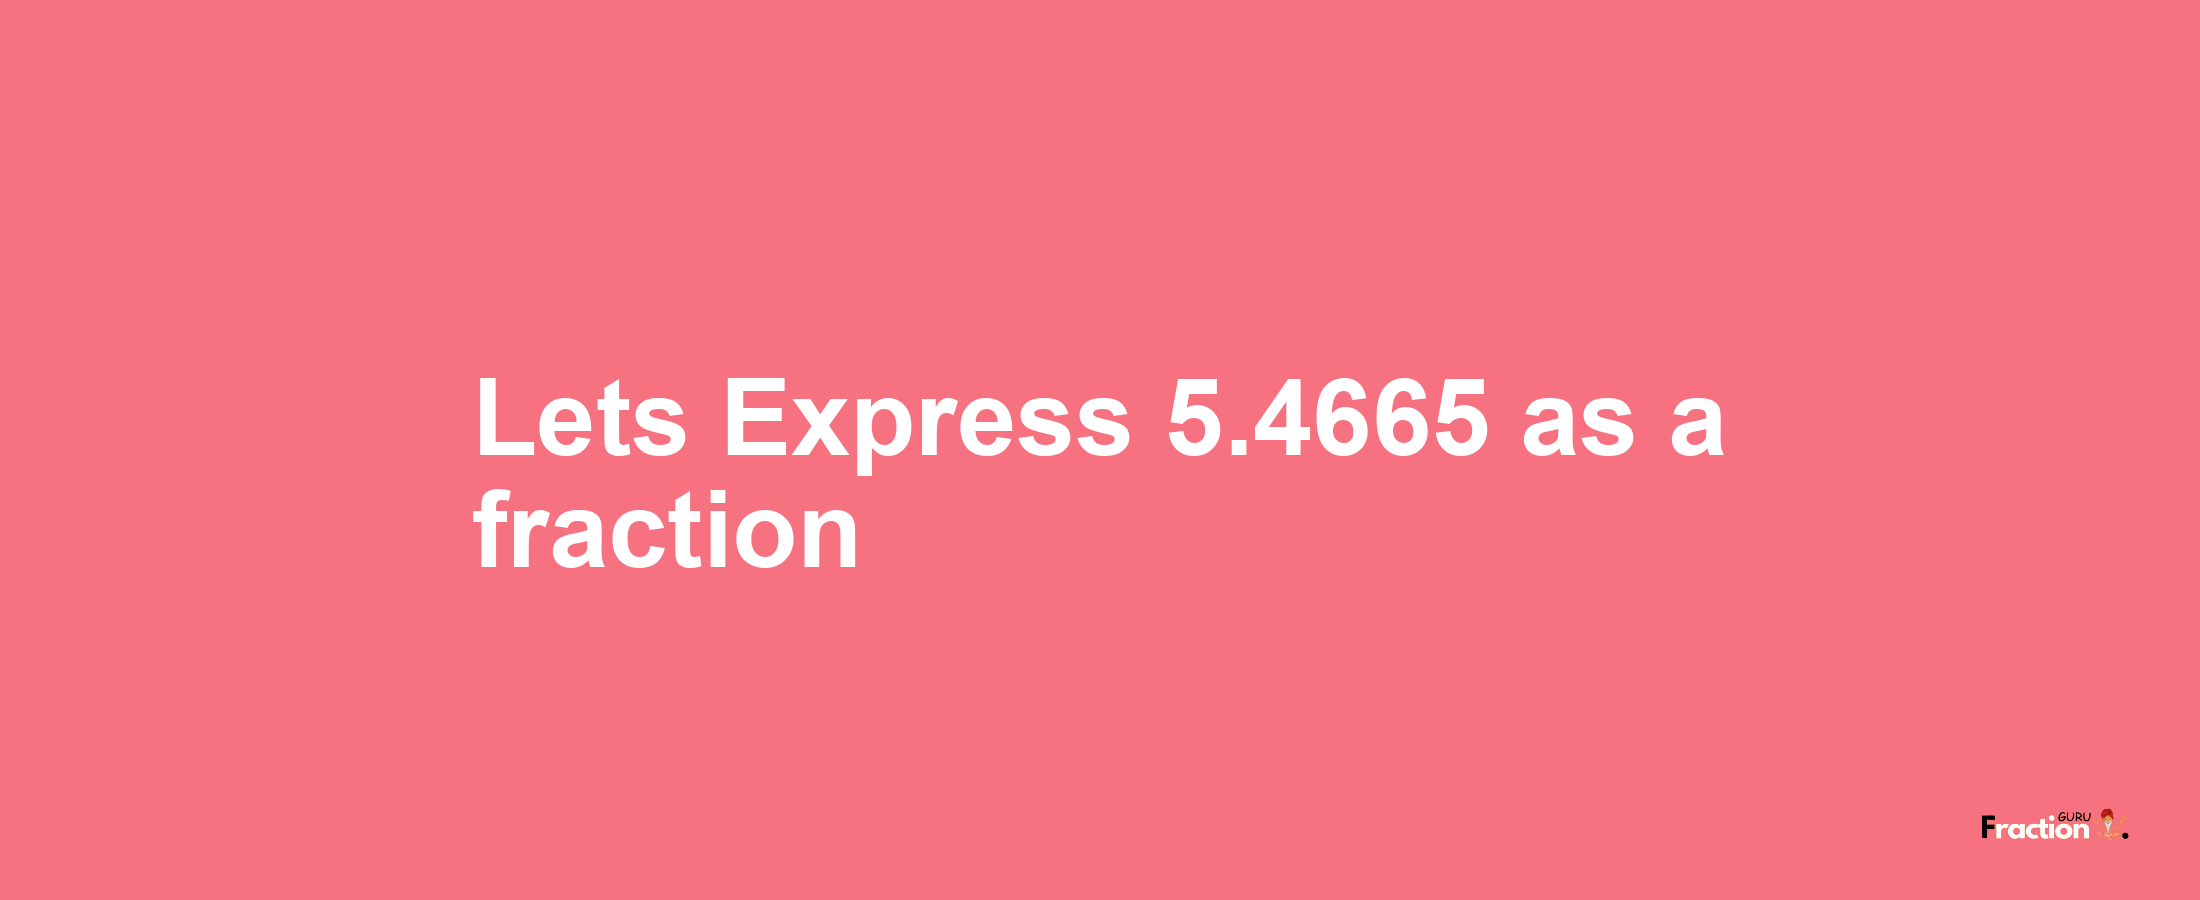 Lets Express 5.4665 as afraction